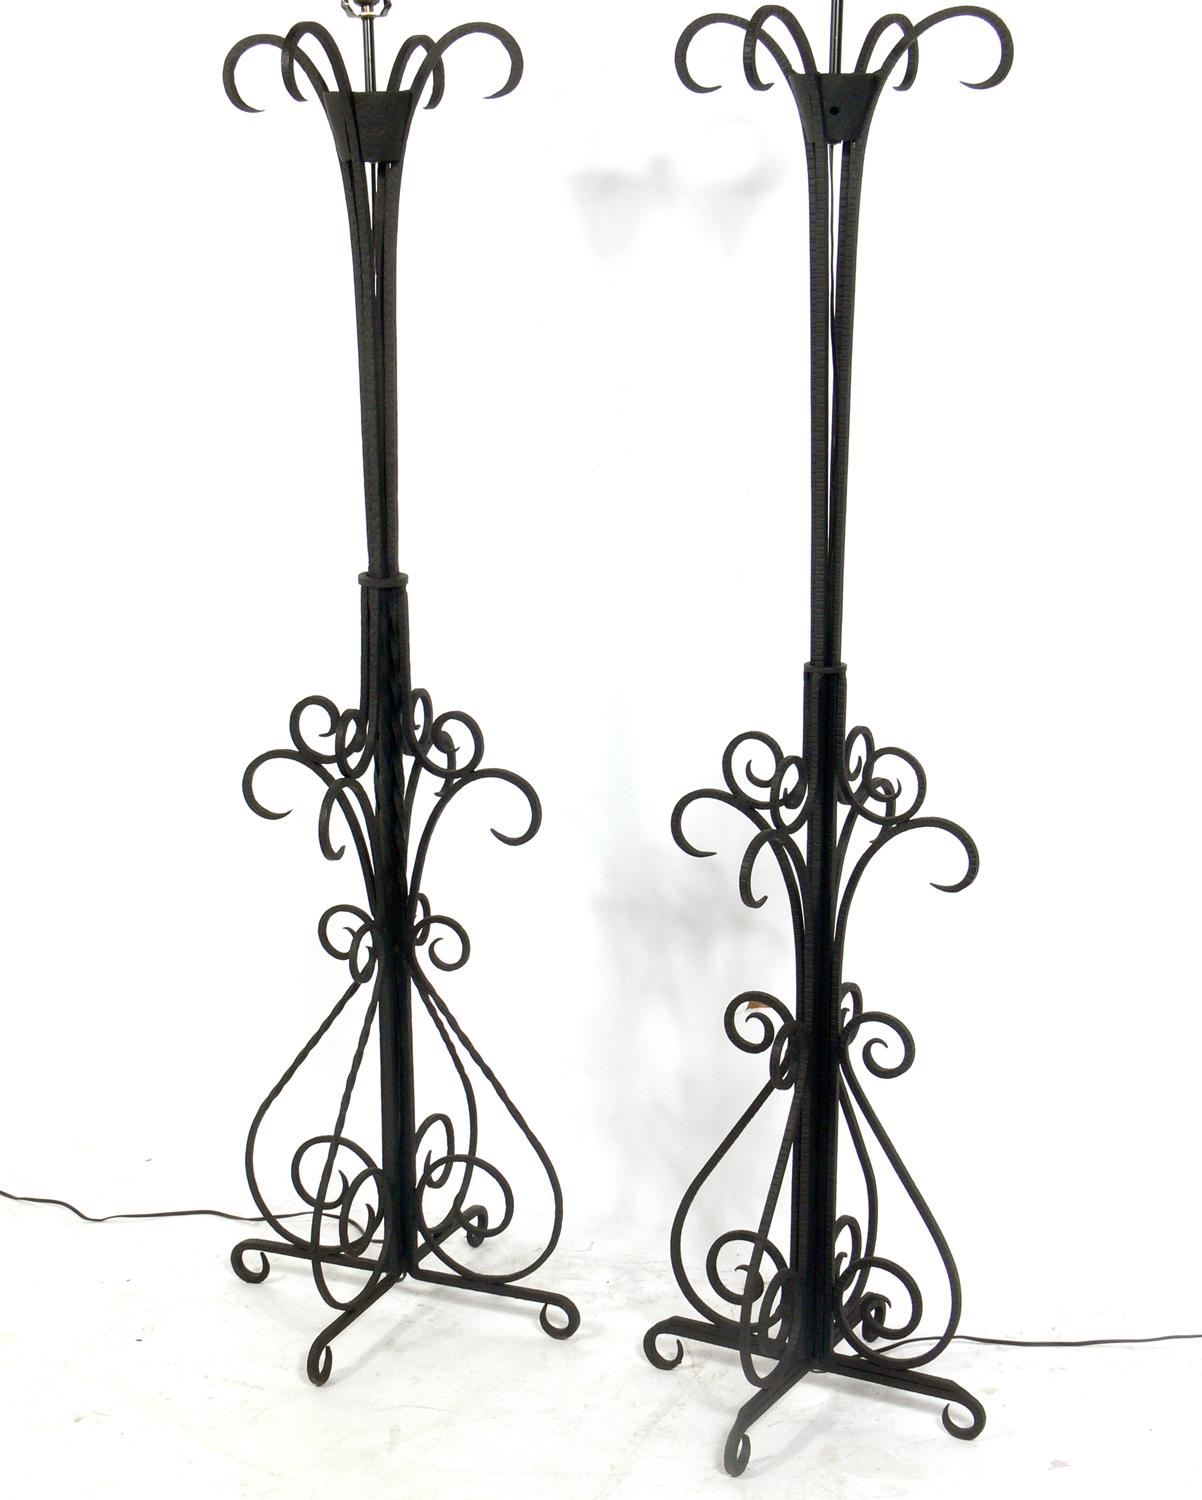 French Art Deco iron floor lamps, France, circa 1930s. As they are each unique, they are not quite an exact pair. They have slight differences in construction and size, only noticed when right next to each other. The floor lamp on the left measures